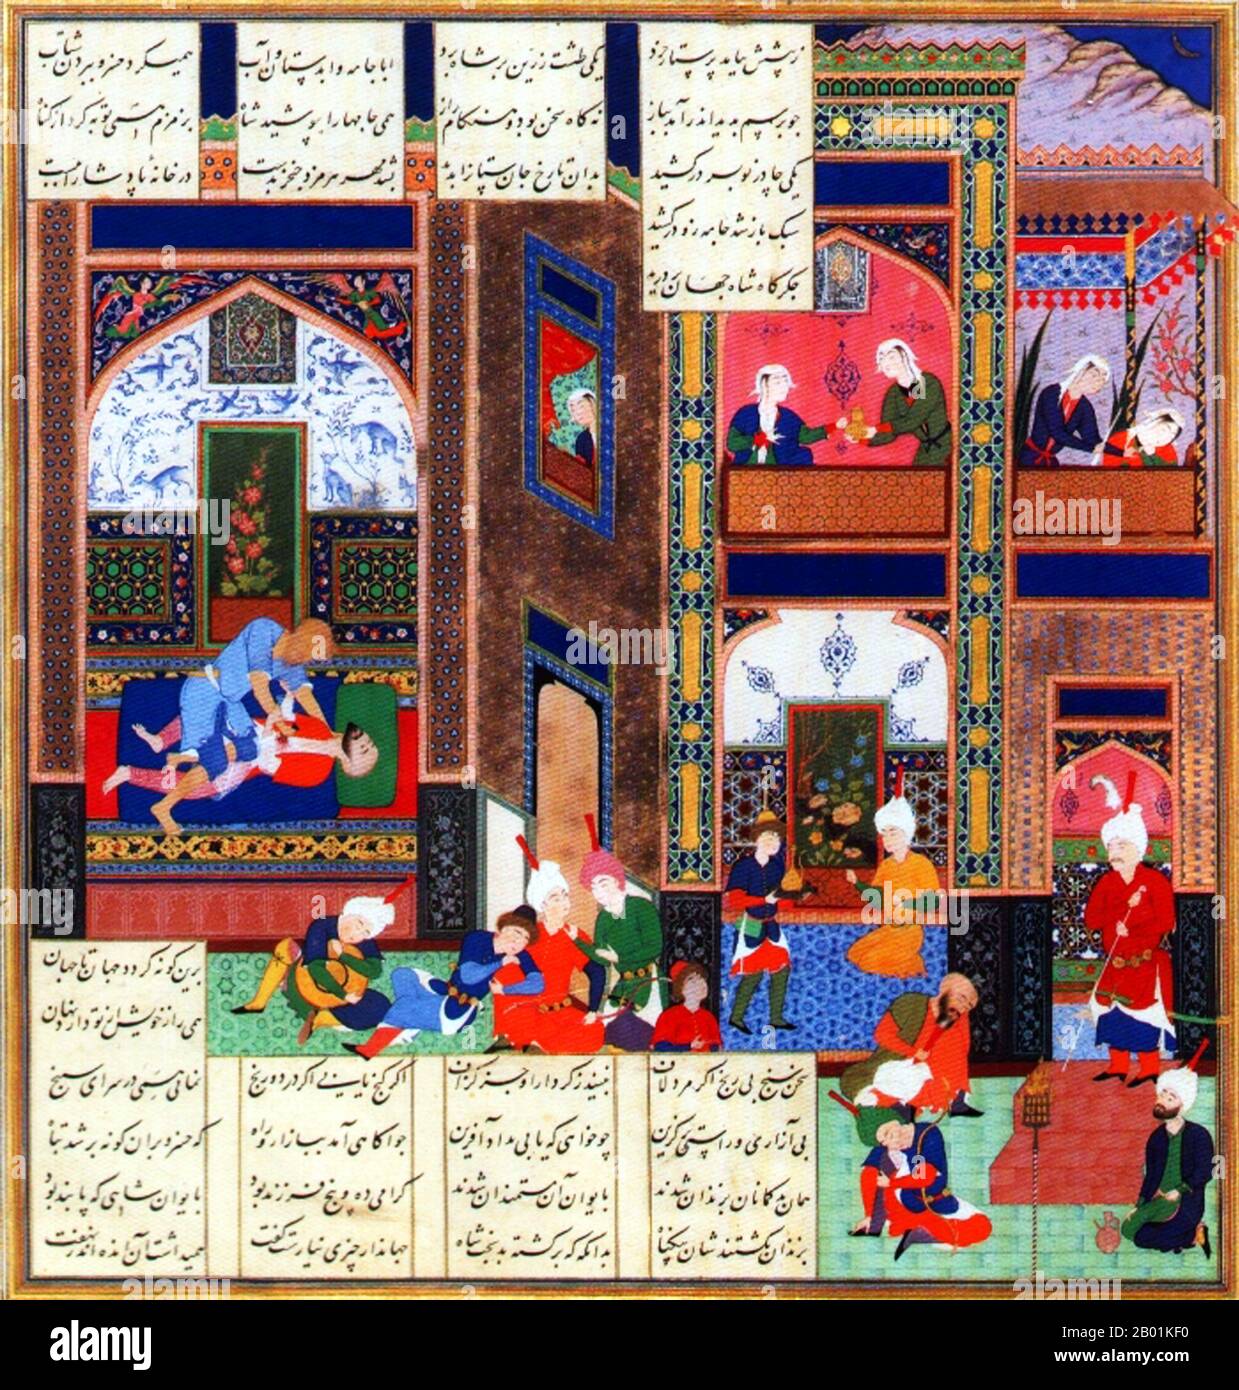 Iran/Persia: The assassination of Sassanian King Chosroes Parvez by Mihr-Hurmuzd. Miniature folio by Abdul-Samad from a Mughal manuscript of the Shahnameh, c. 1535.  The Shahnameh or Shah-nama (Šāhnāmeh, 'The Book of Kings') is a long epic poem written by the Persian poet Ferdowsi between c. 977 and 1010 CE and is the national epic of Iran and related Perso-Iranian cultures. Consisting of some 60,000 verses, the Shahnameh tells the mythical and to some extent the historical past of Greater Iran from the creation of the world until the Islamic conquest of Persia in the 7th century. Stock Photo